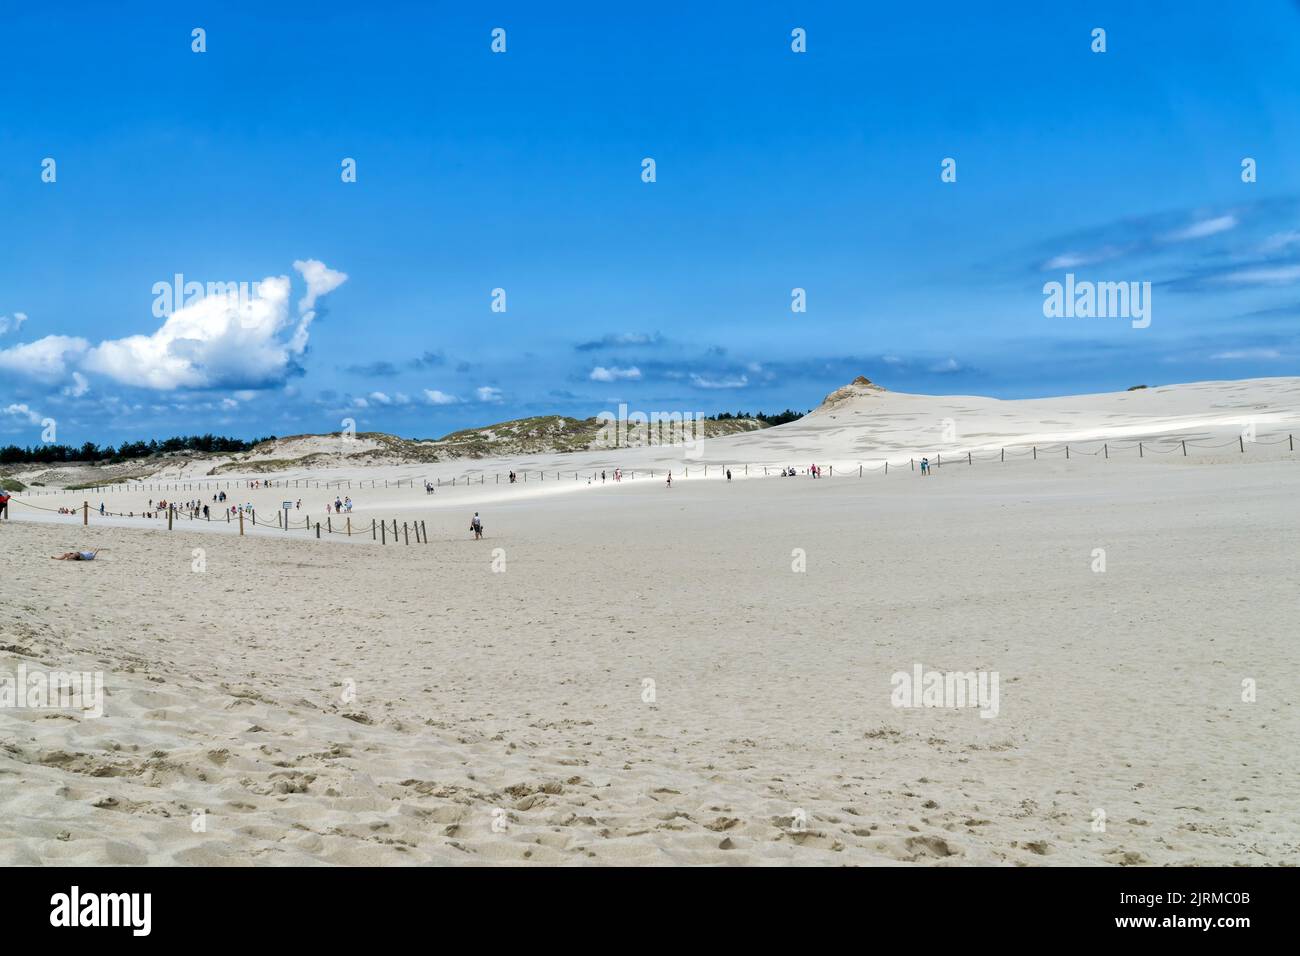 People explore in Lacka dune in Slowinski National Park in Poland. Traveling dune in sunny summer day. Sandy beach and and blue sky with white clouds. Stock Photo